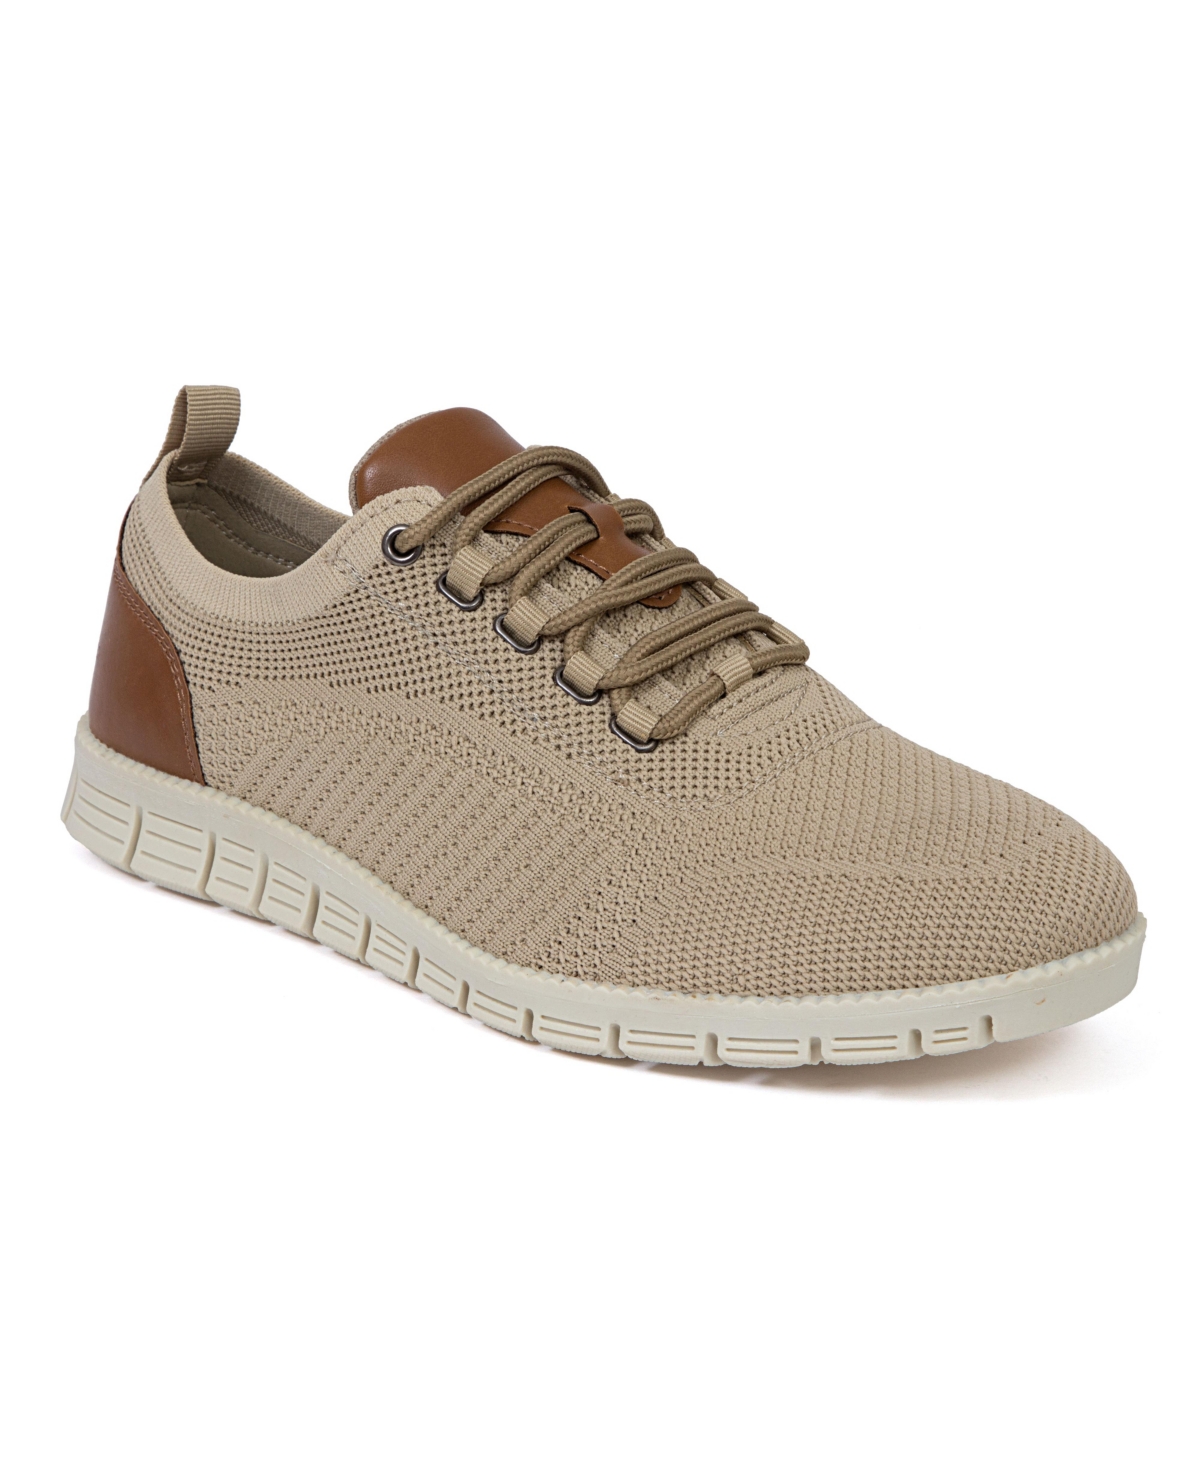 Deer Stags Men's Status Comfort Fashion Sneakers Men's Shoes In Taupe/ Brown